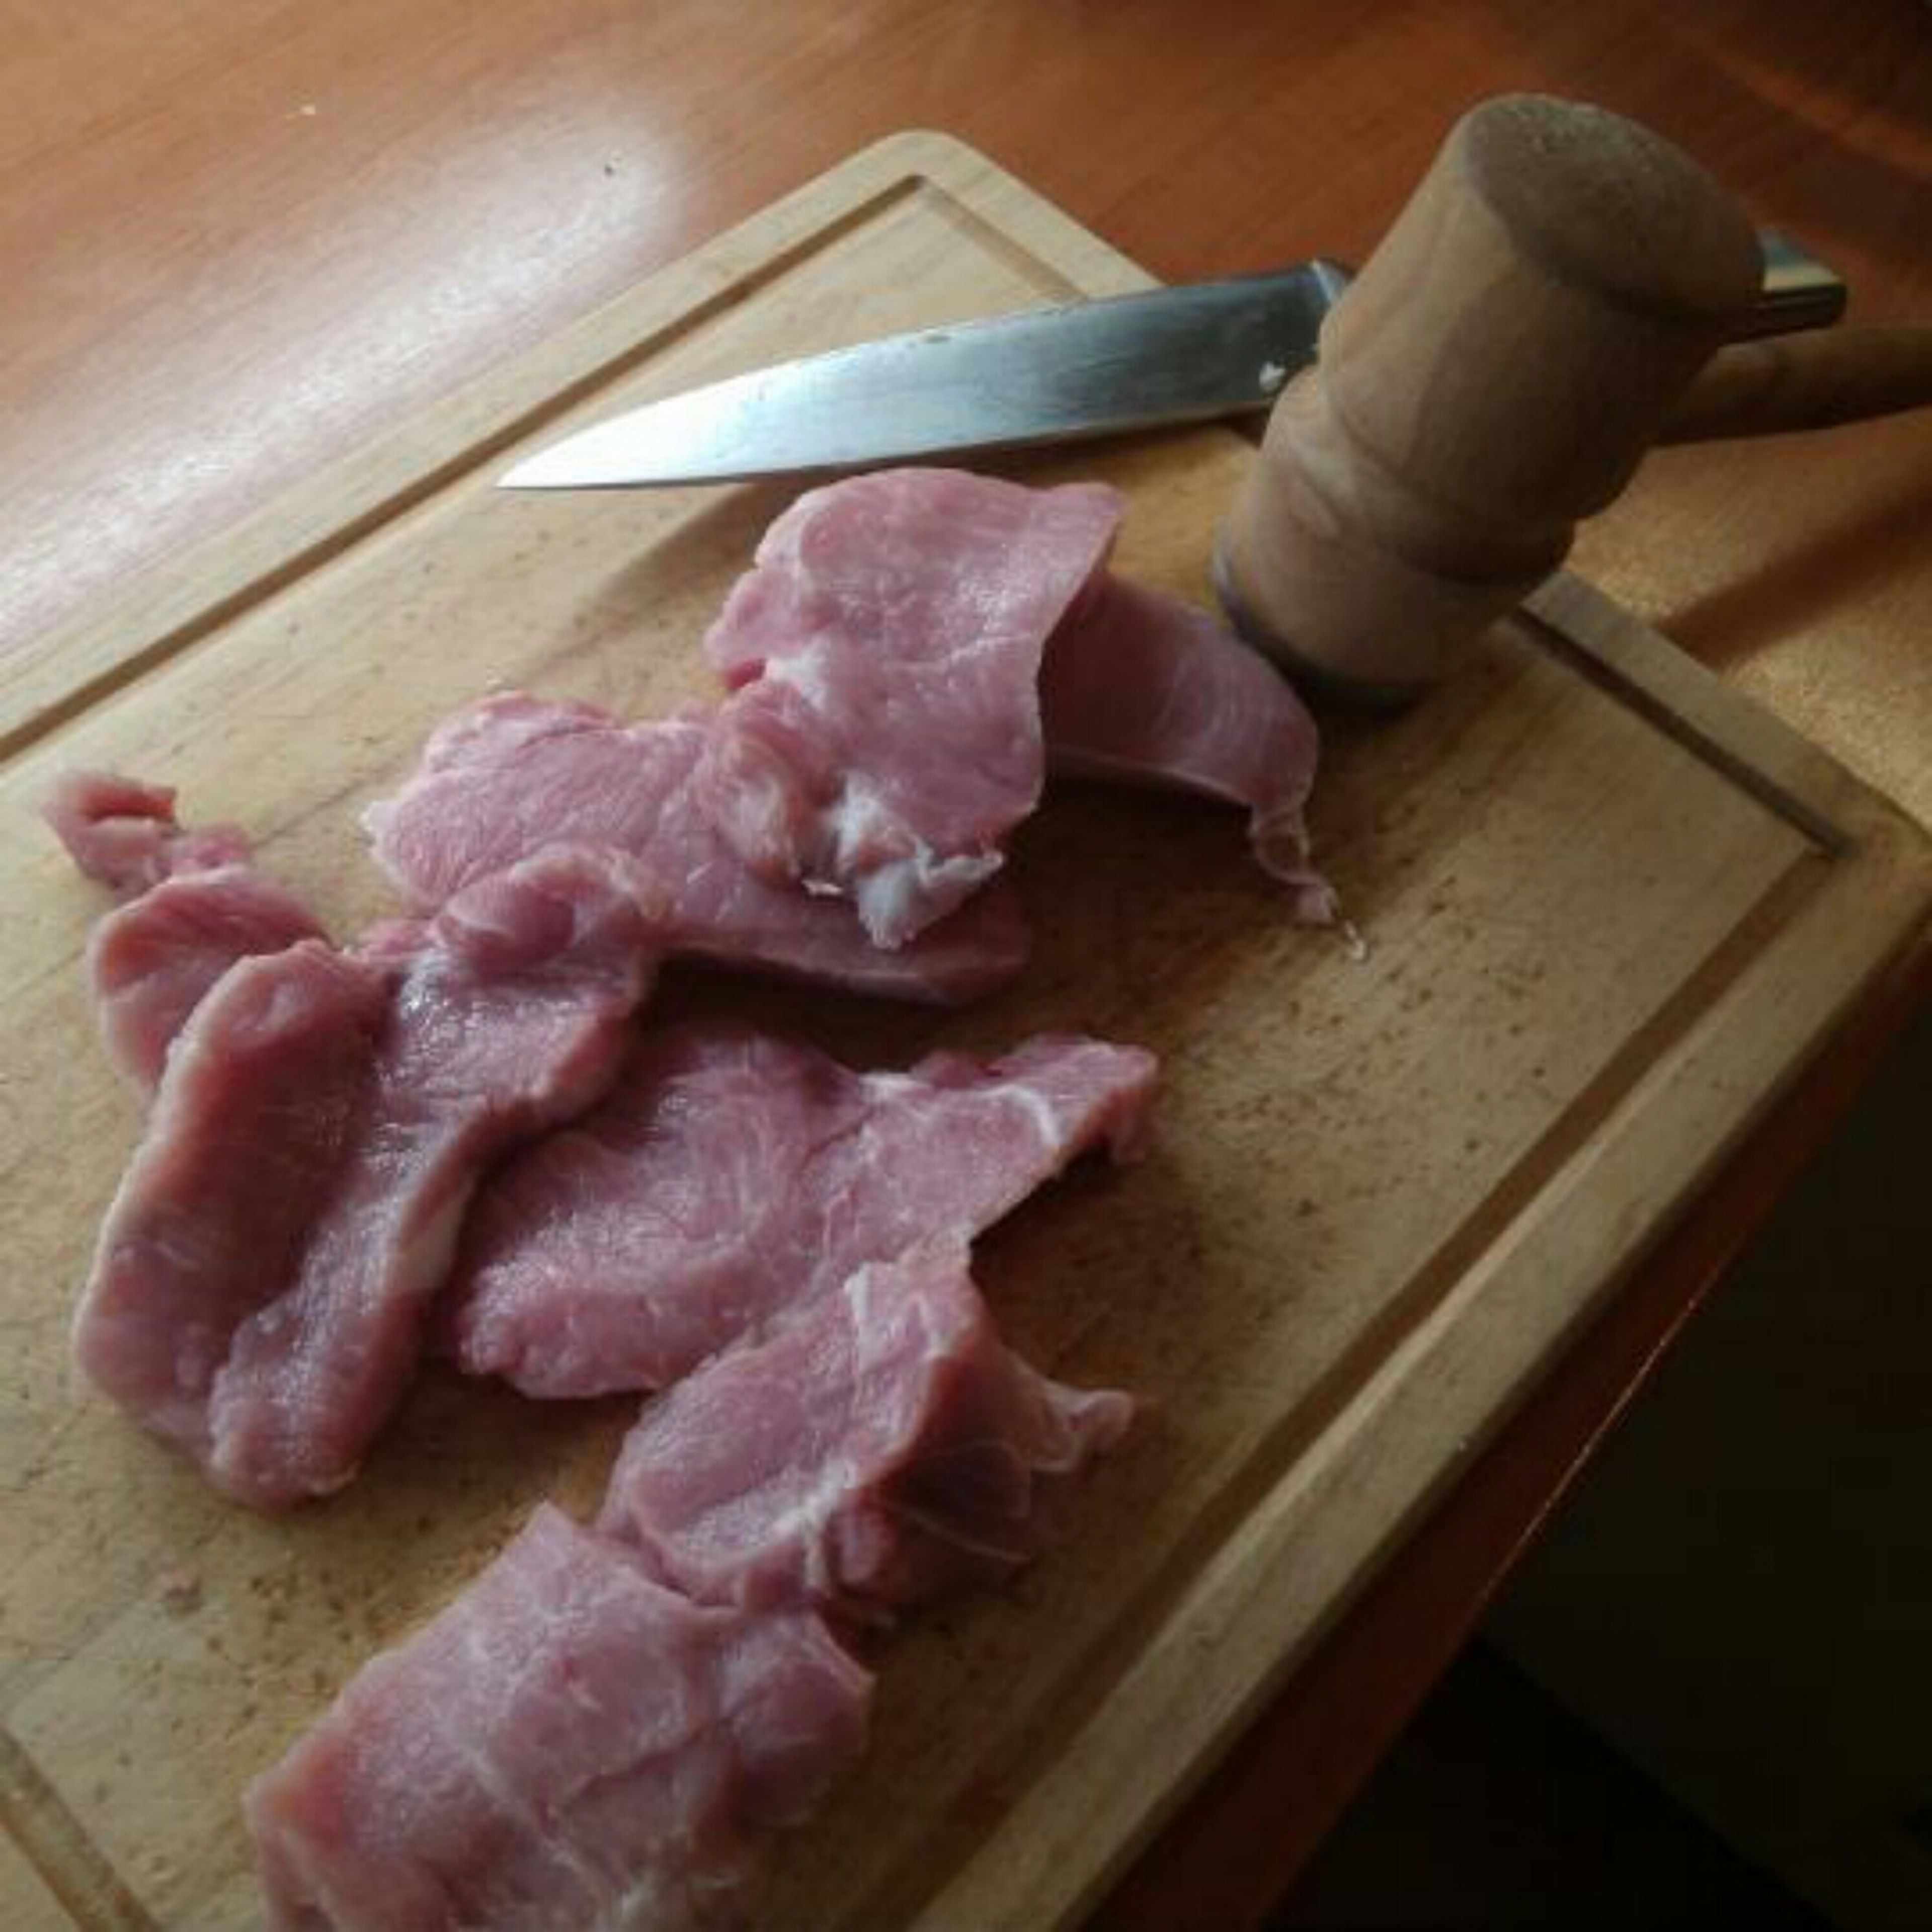 At first, cut the meat into slices (approx. 1 cm - 2 cm thick).